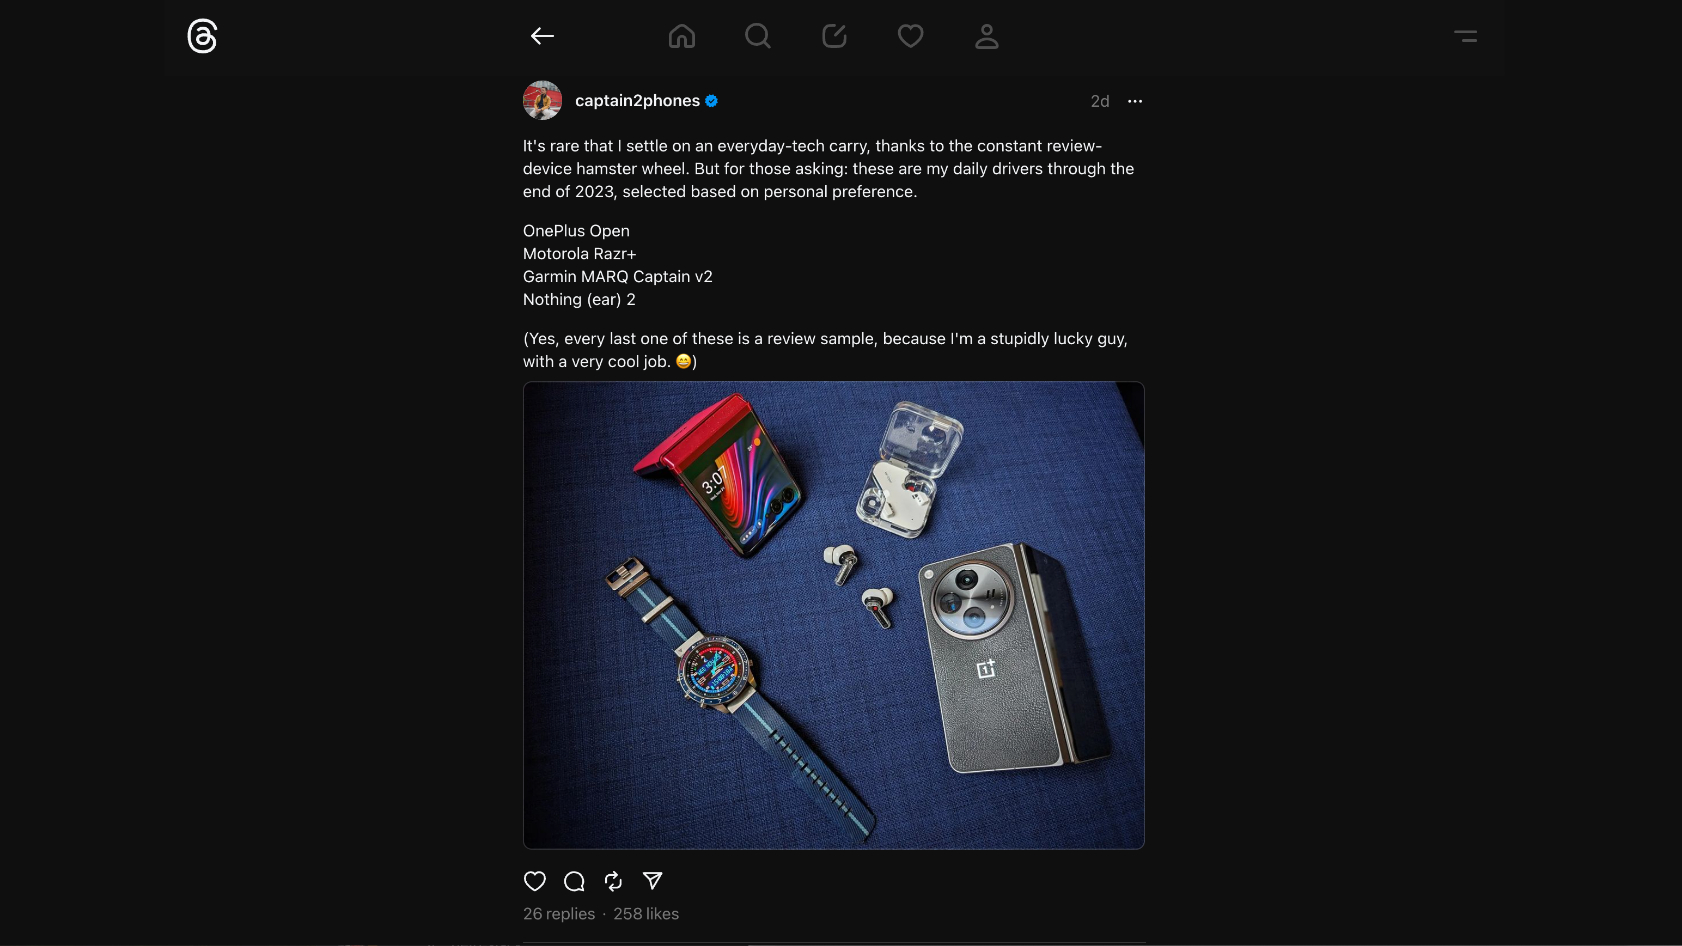 Michael Fisher Threads post showing his favorite devices including a OnePlus Open and Motorola Razr Plus